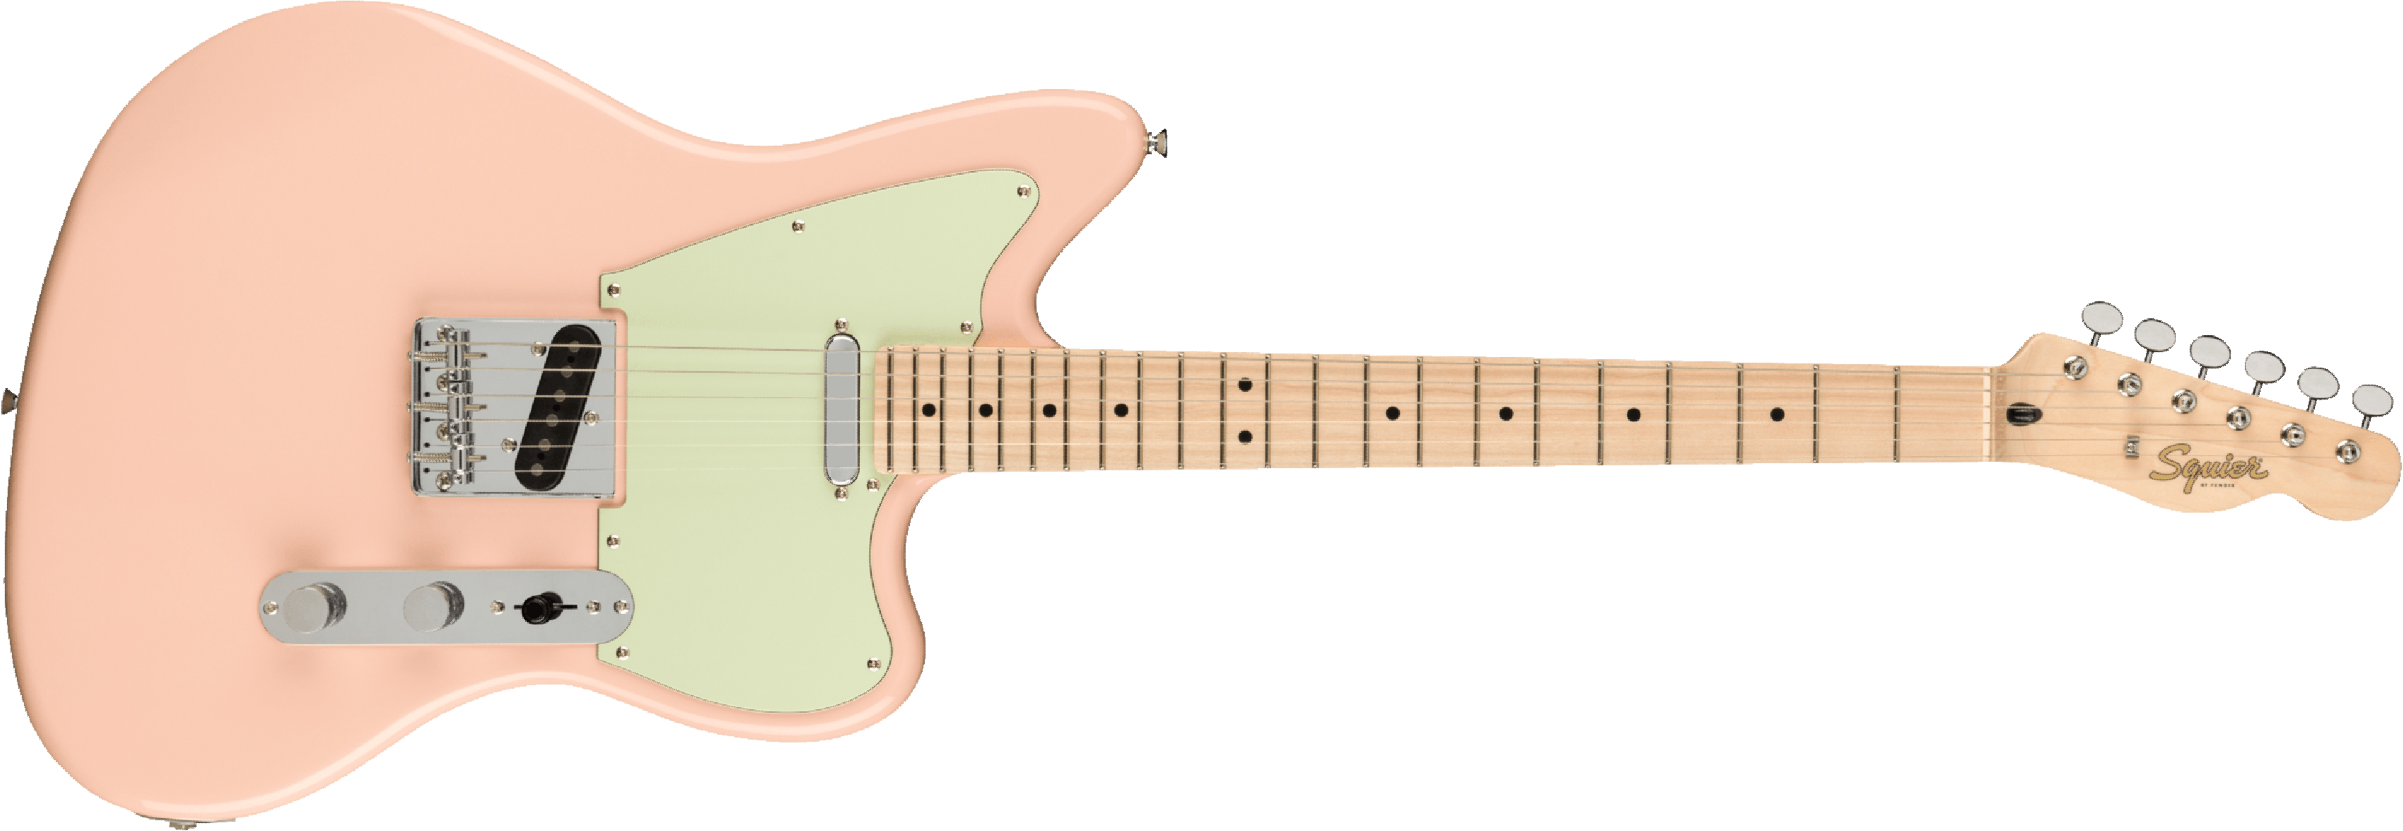 Squier Tele Offset Paranormal Ss Ht Mn - Shell Pink - Retro rock electric guitar - Main picture